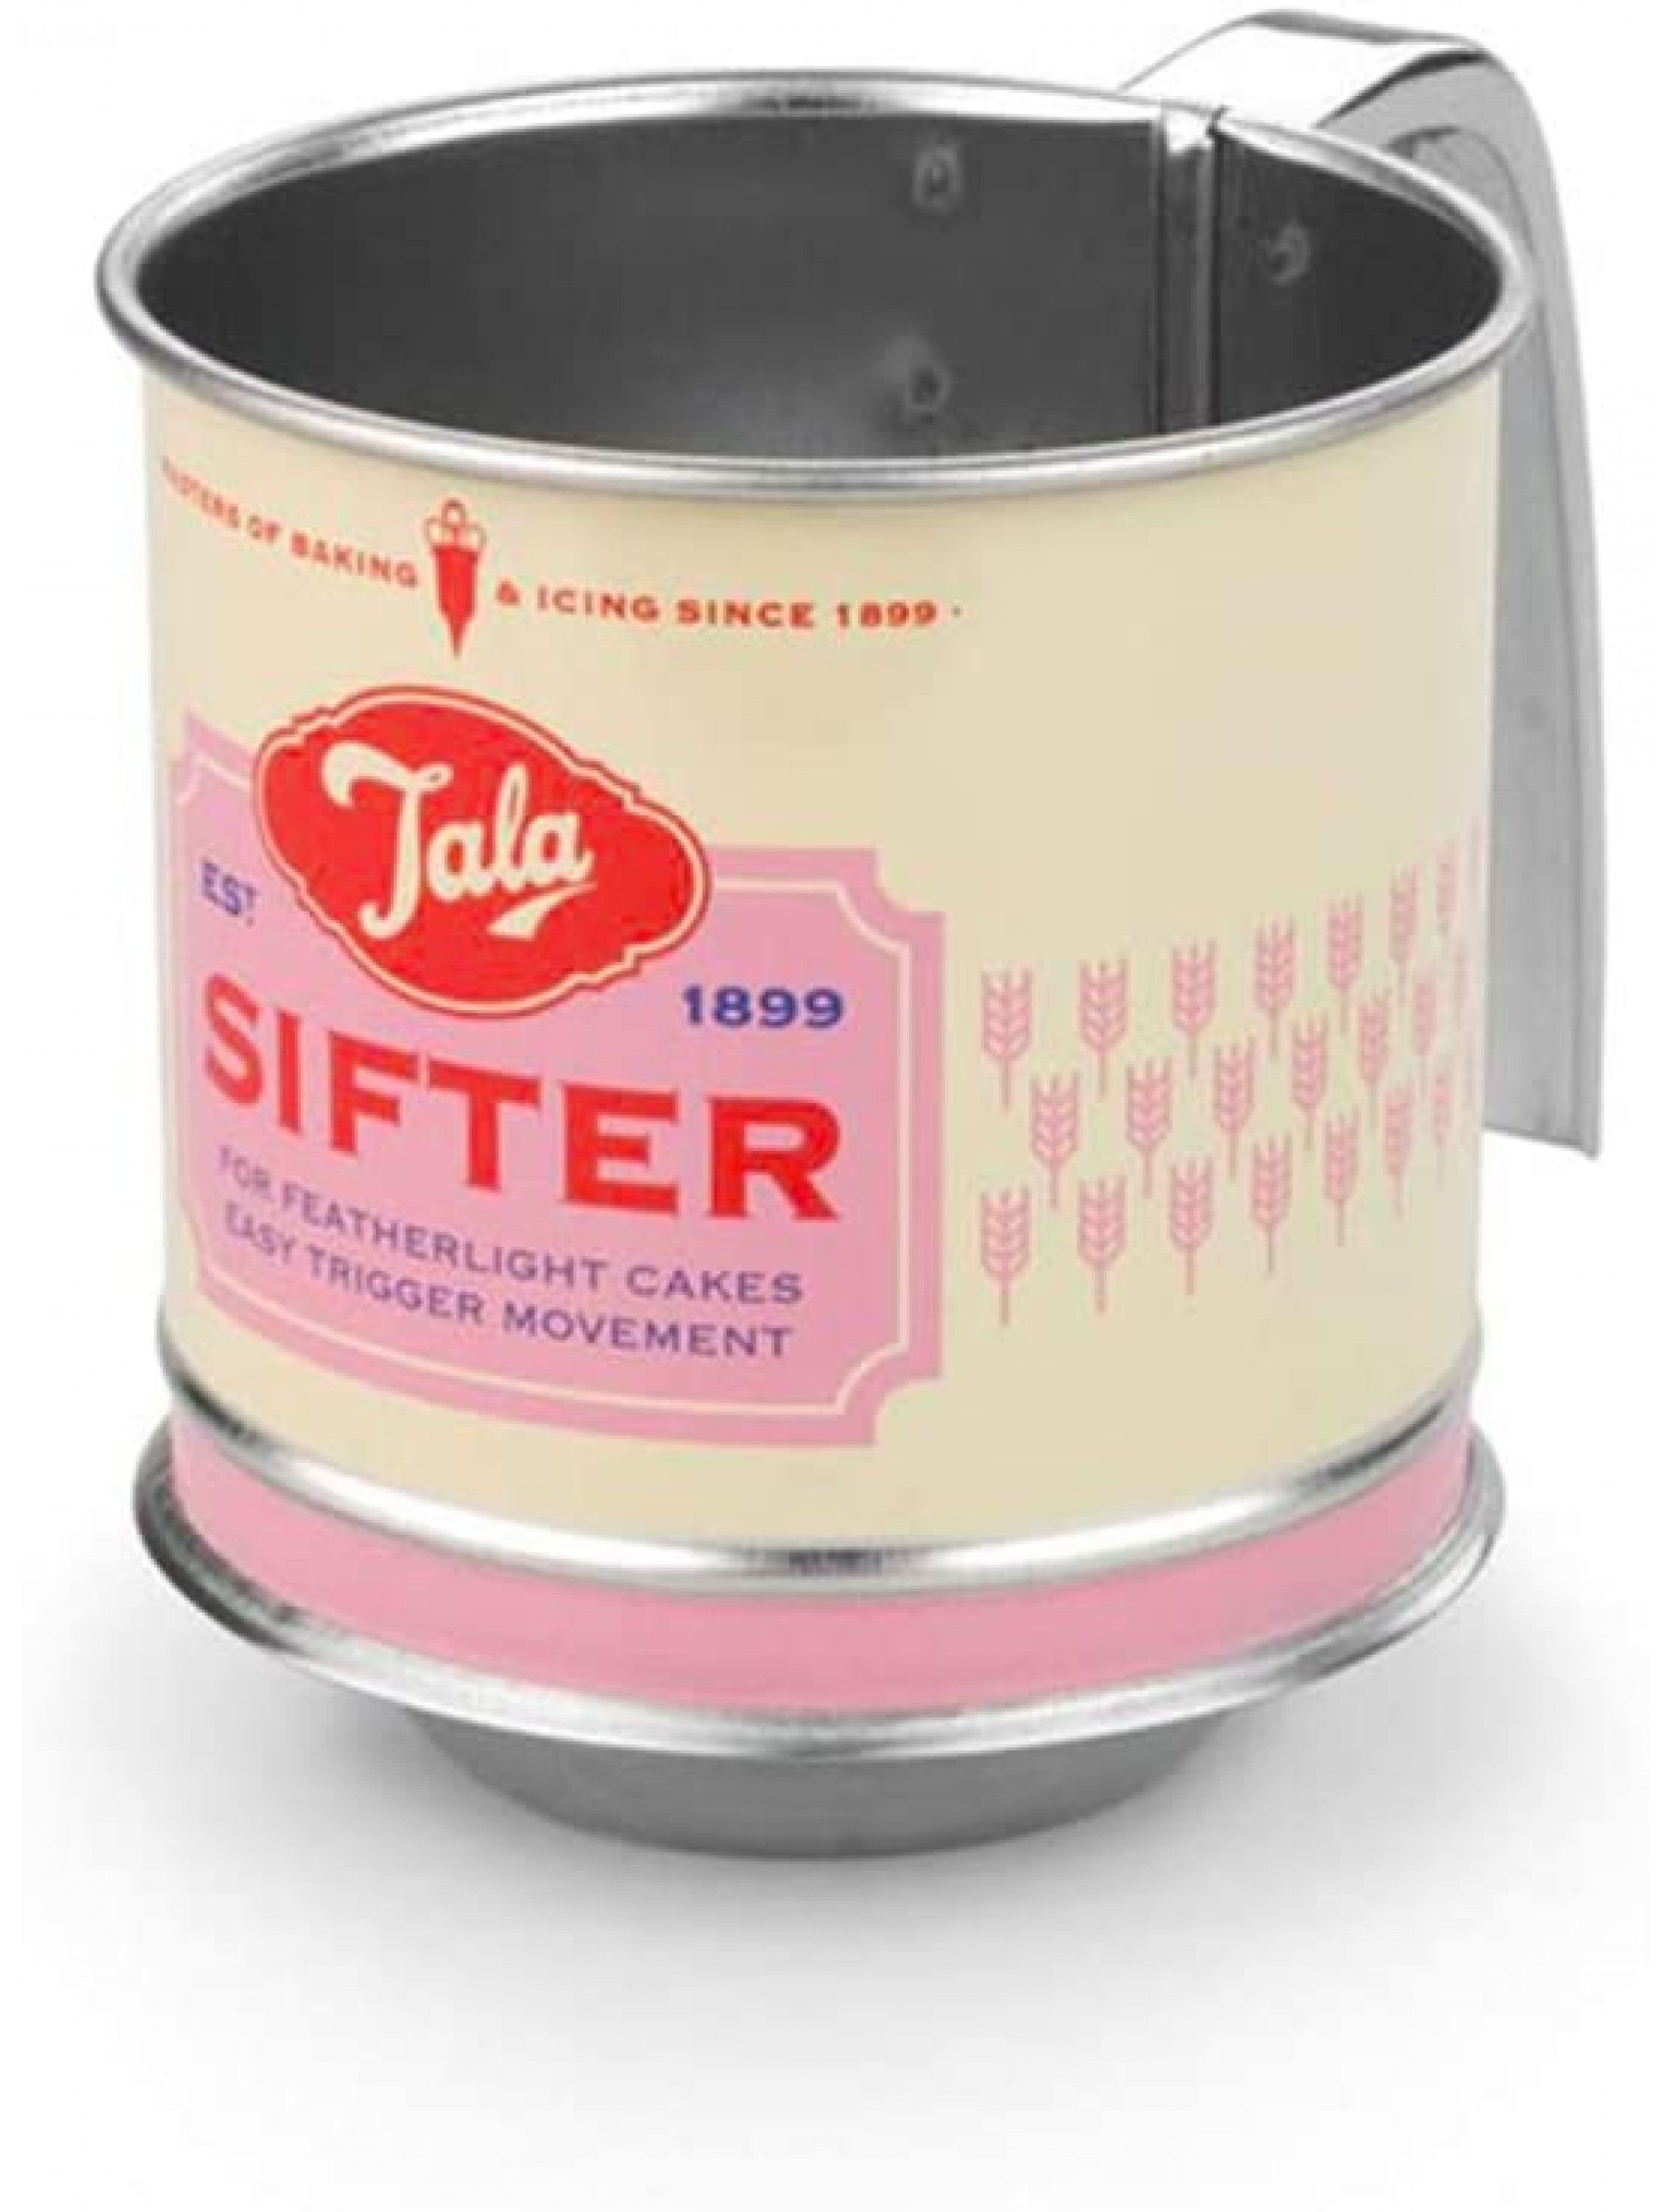 Tala Mini Sifter with Stainless Steel Mesh Pink Cream Red - BCRG3N8TI